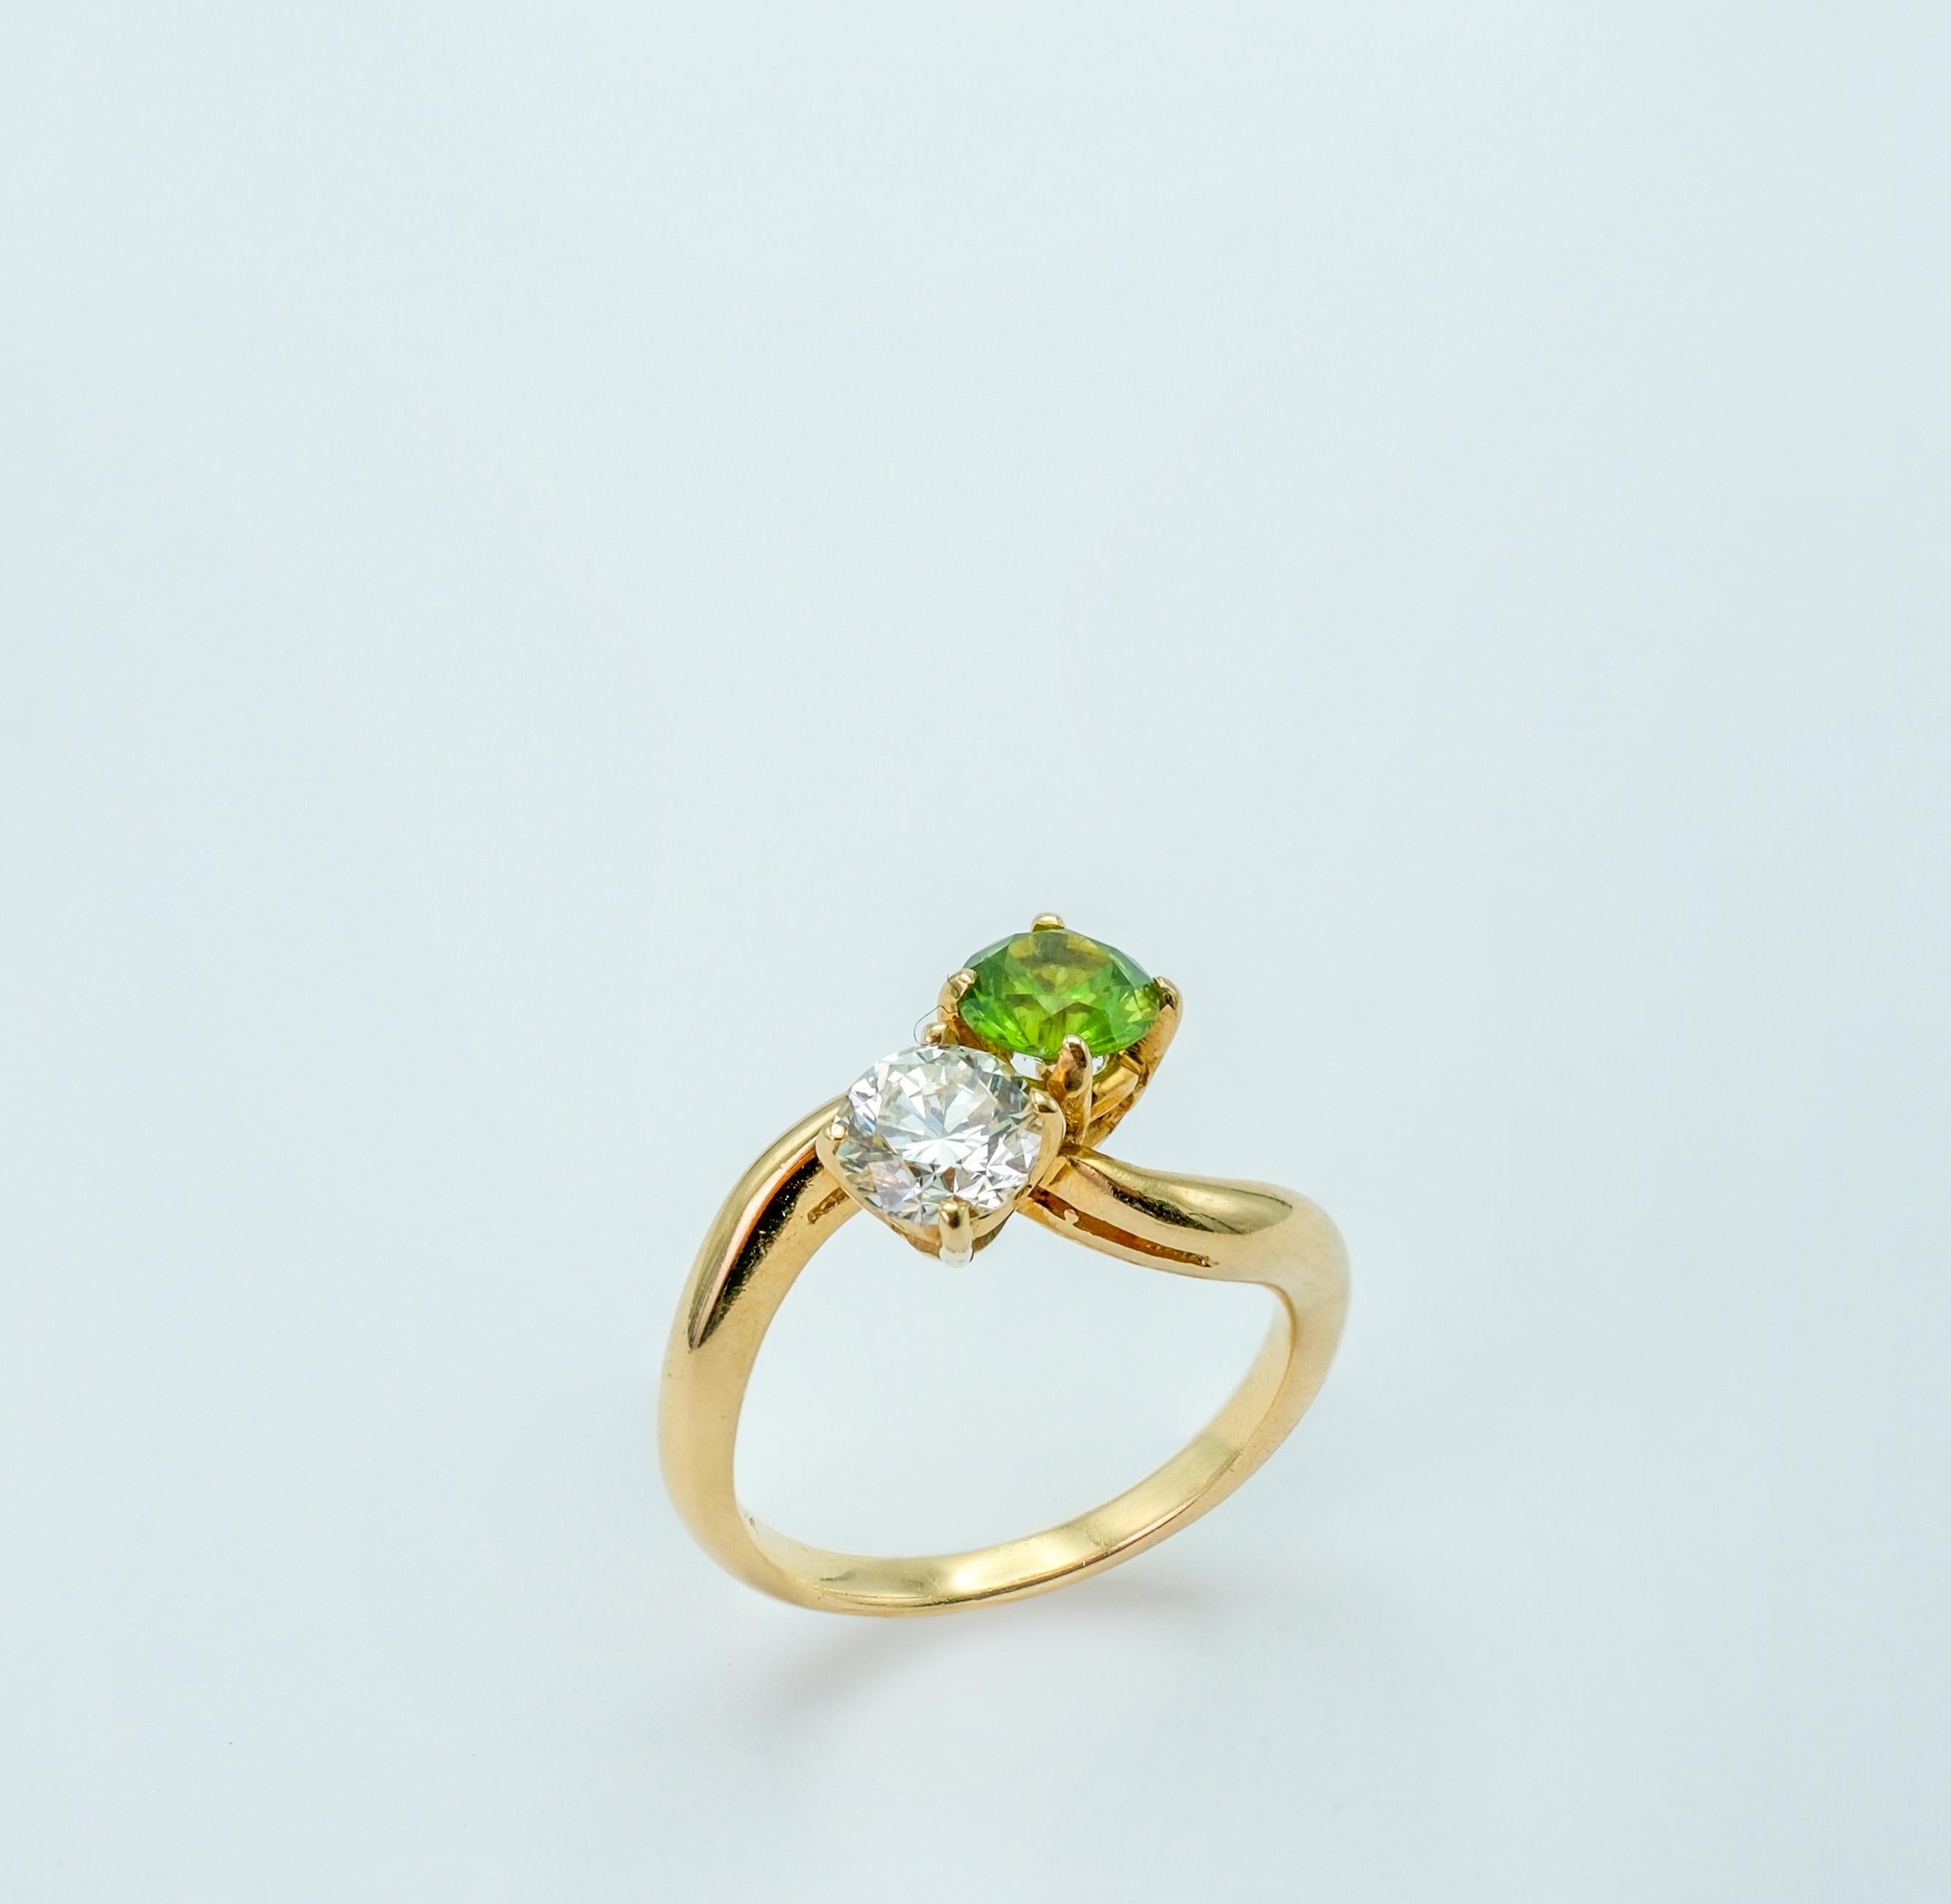 Both the demantoid garnet and the diamond featured in this jewelry piece possess exceptional qualities that contribute to their luxurious and special nature.

The demantoid garnet, with its .85ct size, exhibits a mesmerizing green color that is